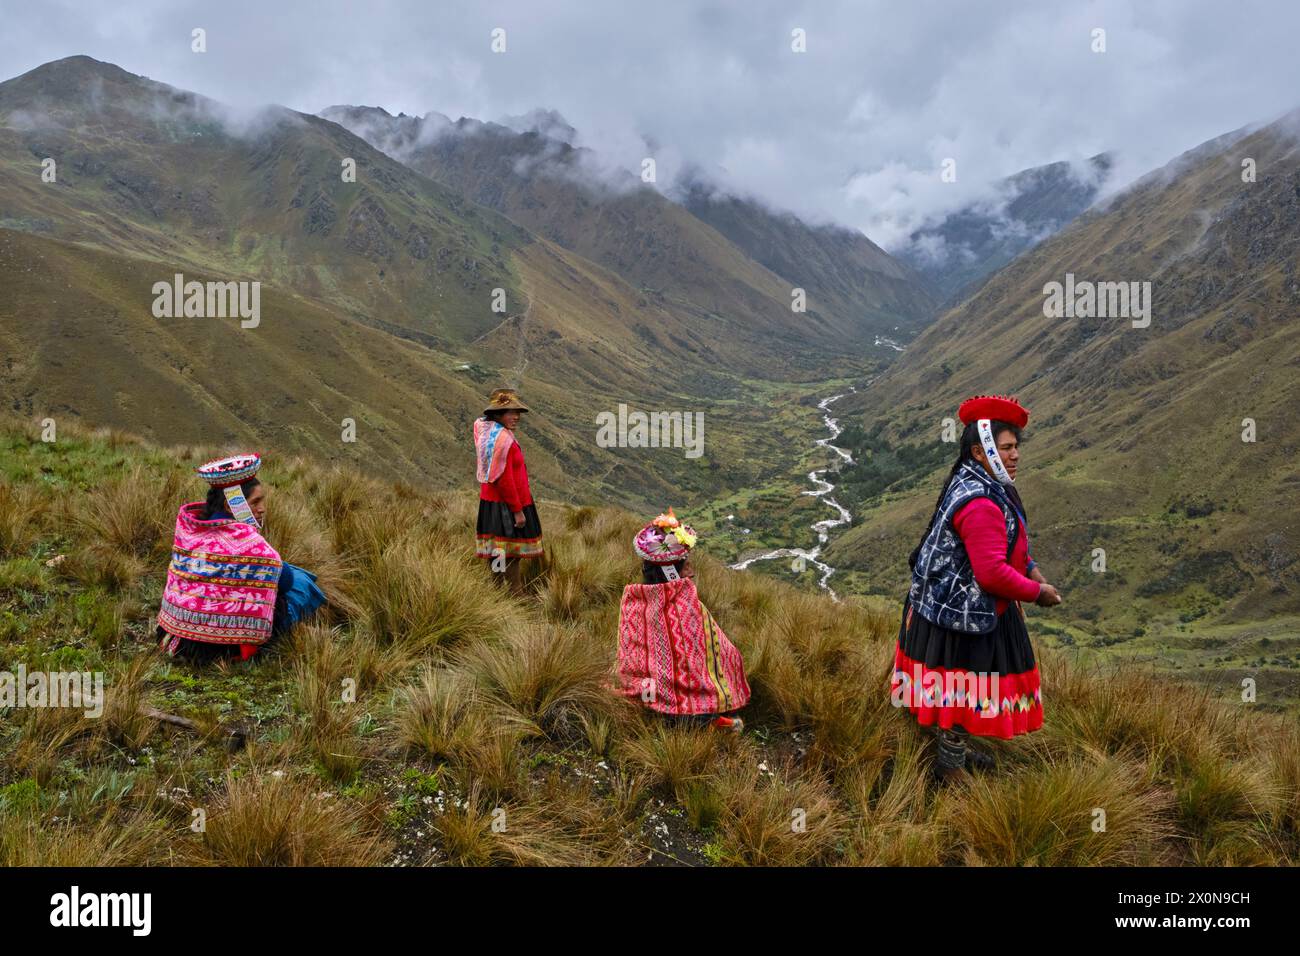 Peru, province of Cuzco, the Sacred Valley of the Incas, communities of the Andes, group of local Quechua peoples in the Vilcanota valley Stock Photo